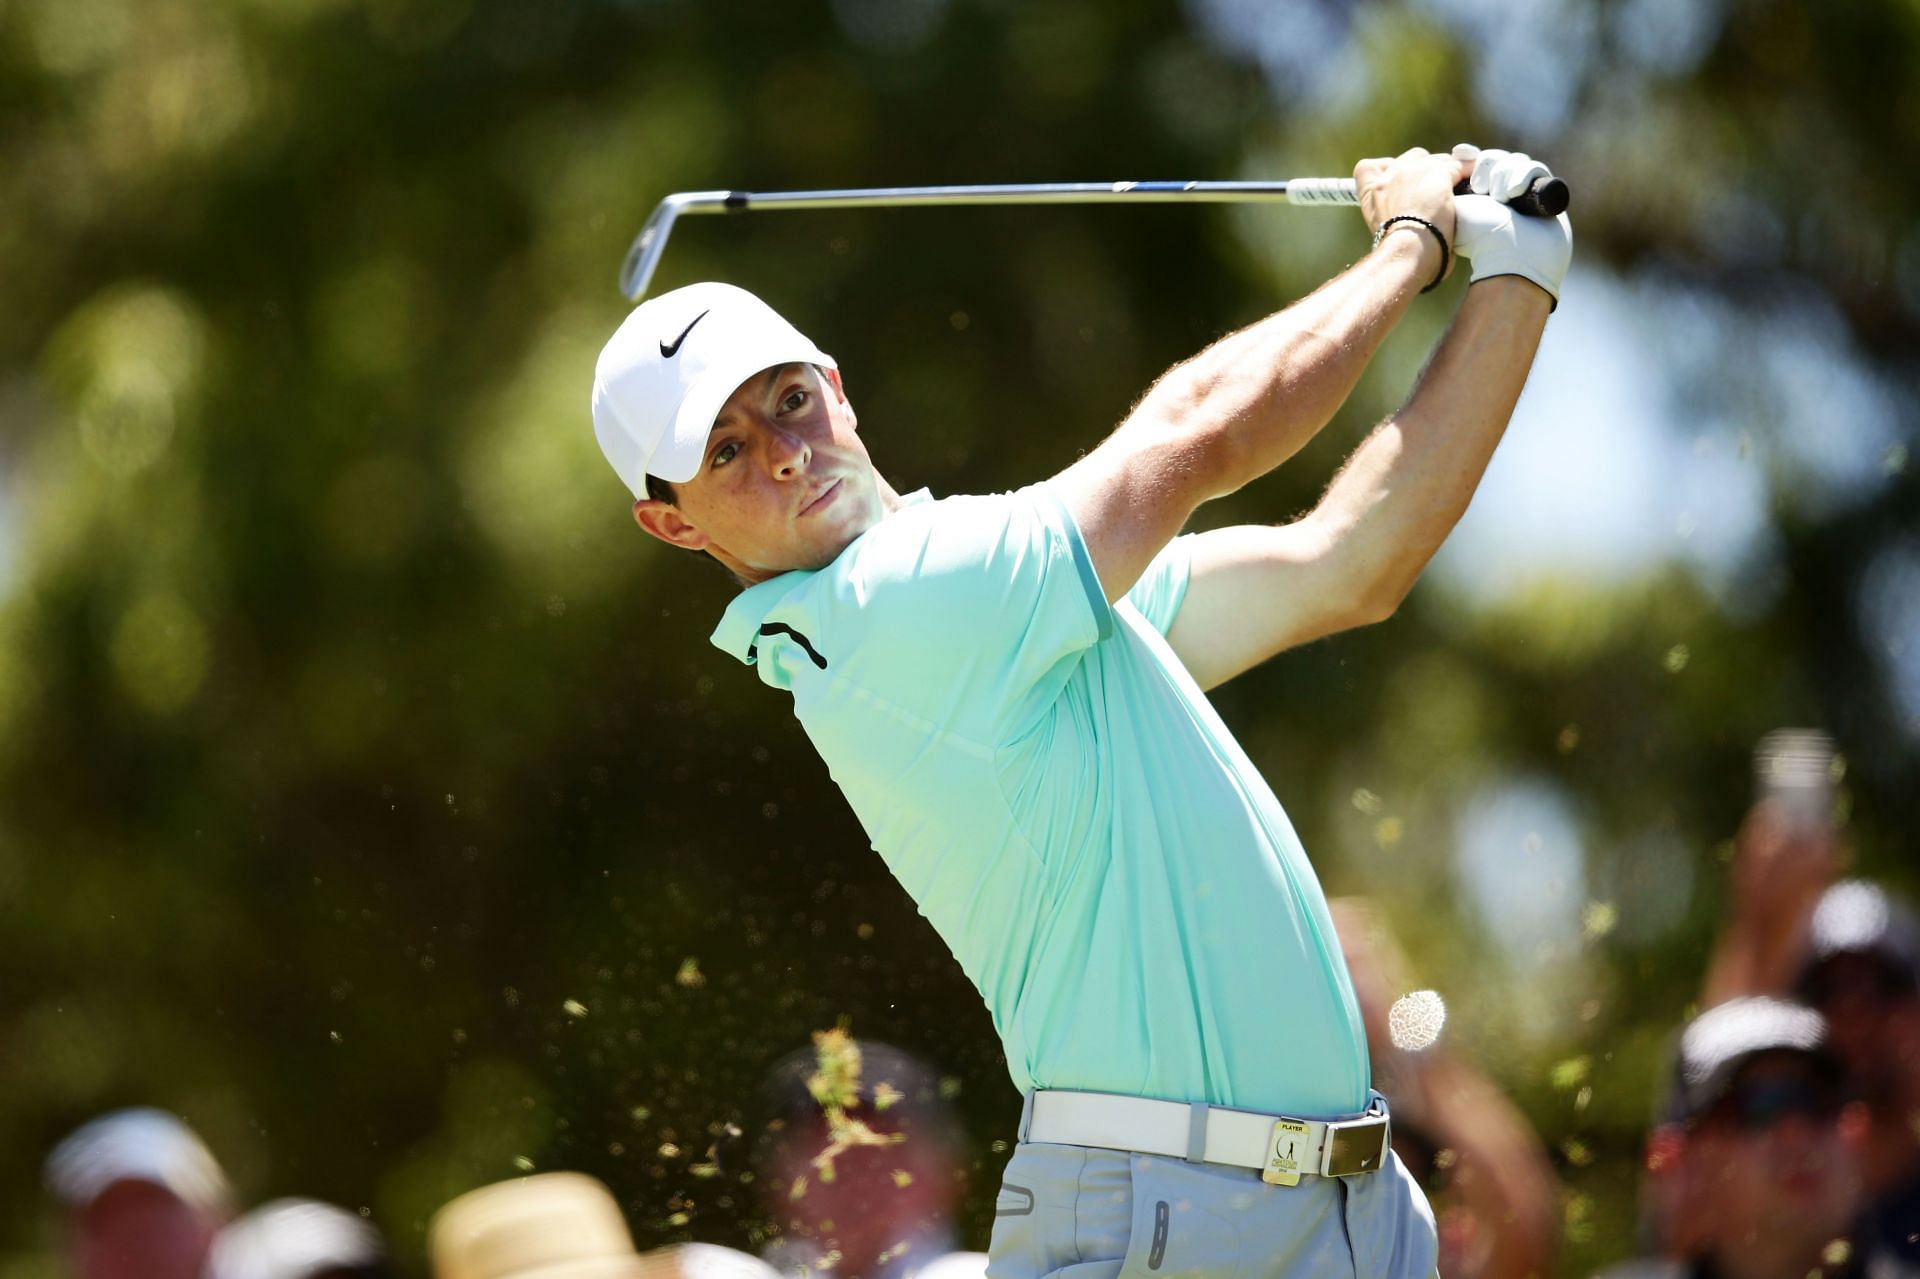 Rory McIlroy at the 2014 Australian Open (Image via Getty)